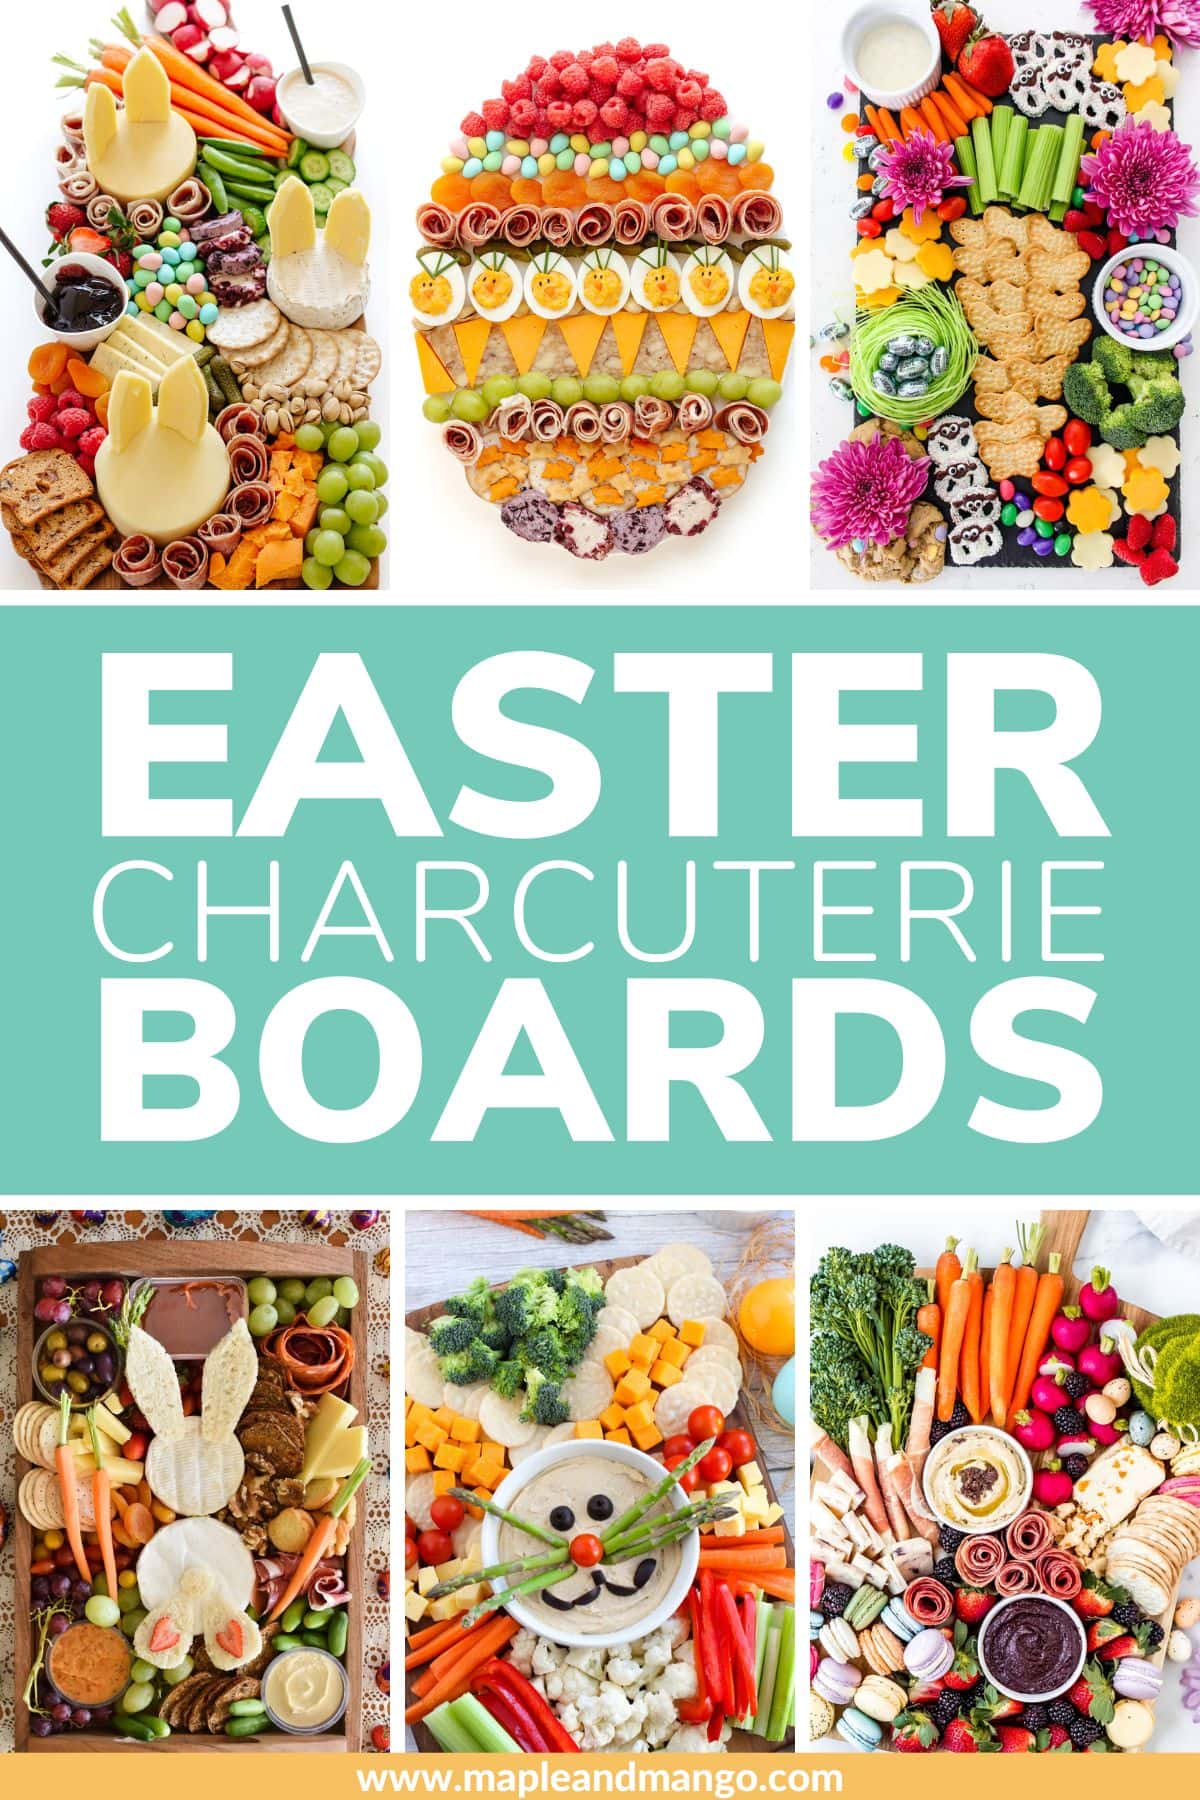 Photo collage of Easter themed boards with text overlay that reads "Easter Charcuterie Boards".